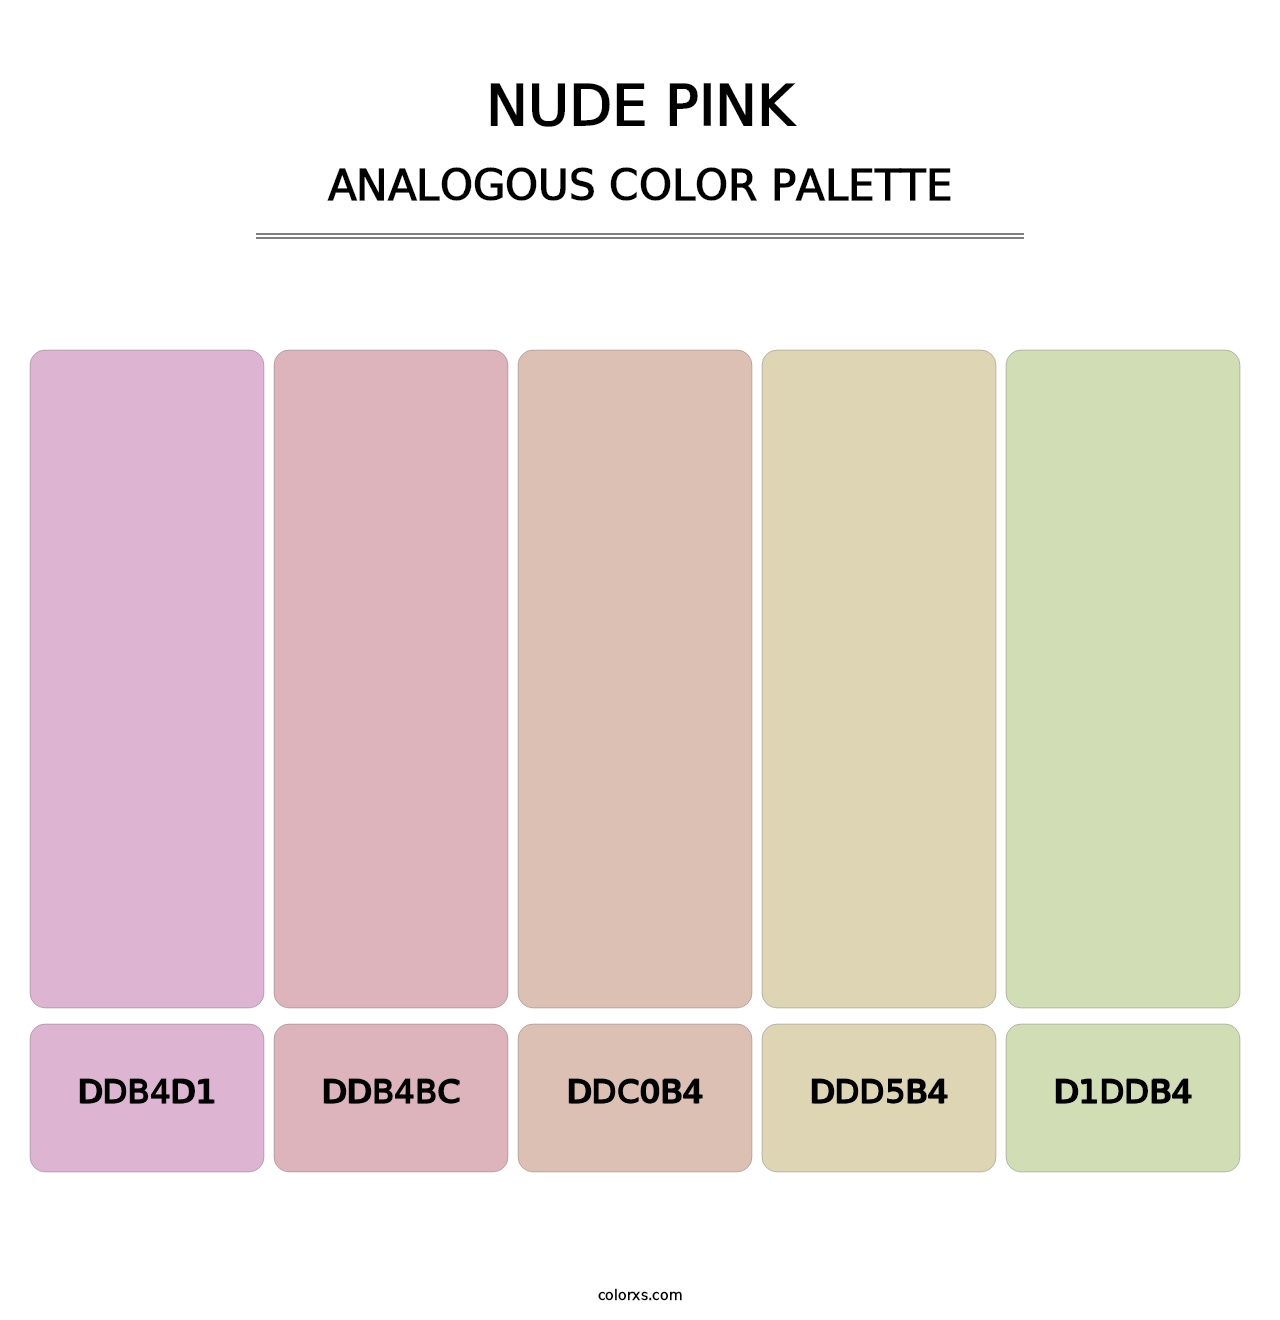 Nude Pink - Analogous Color Palette